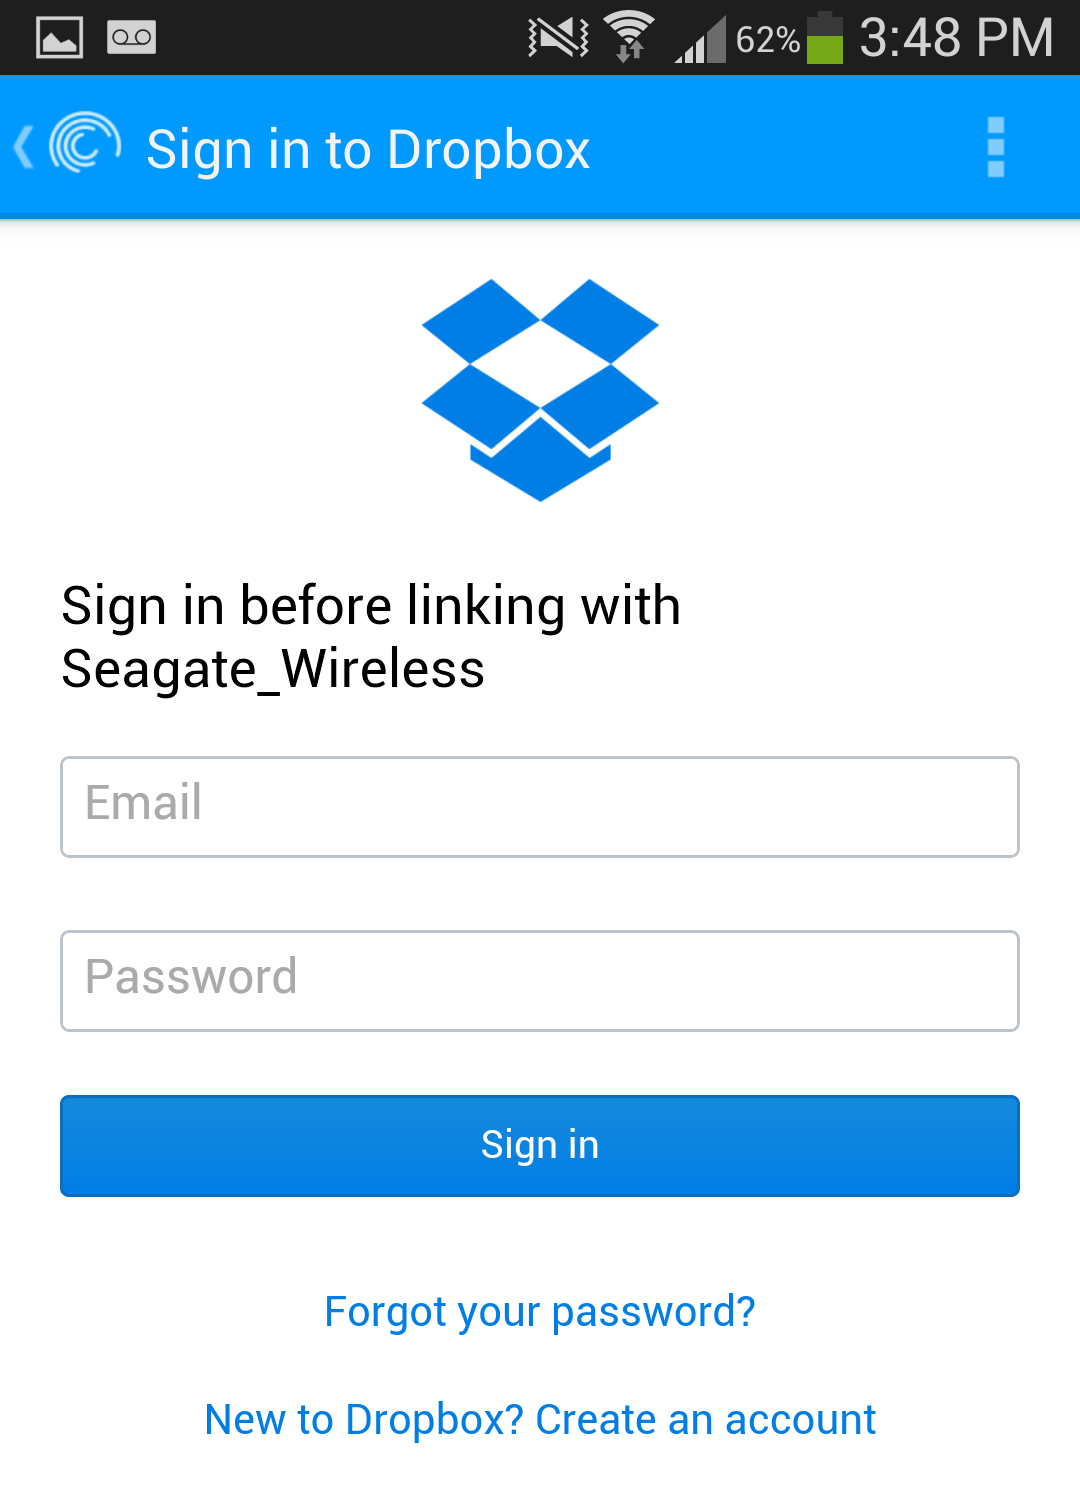 Sign in to dropbox